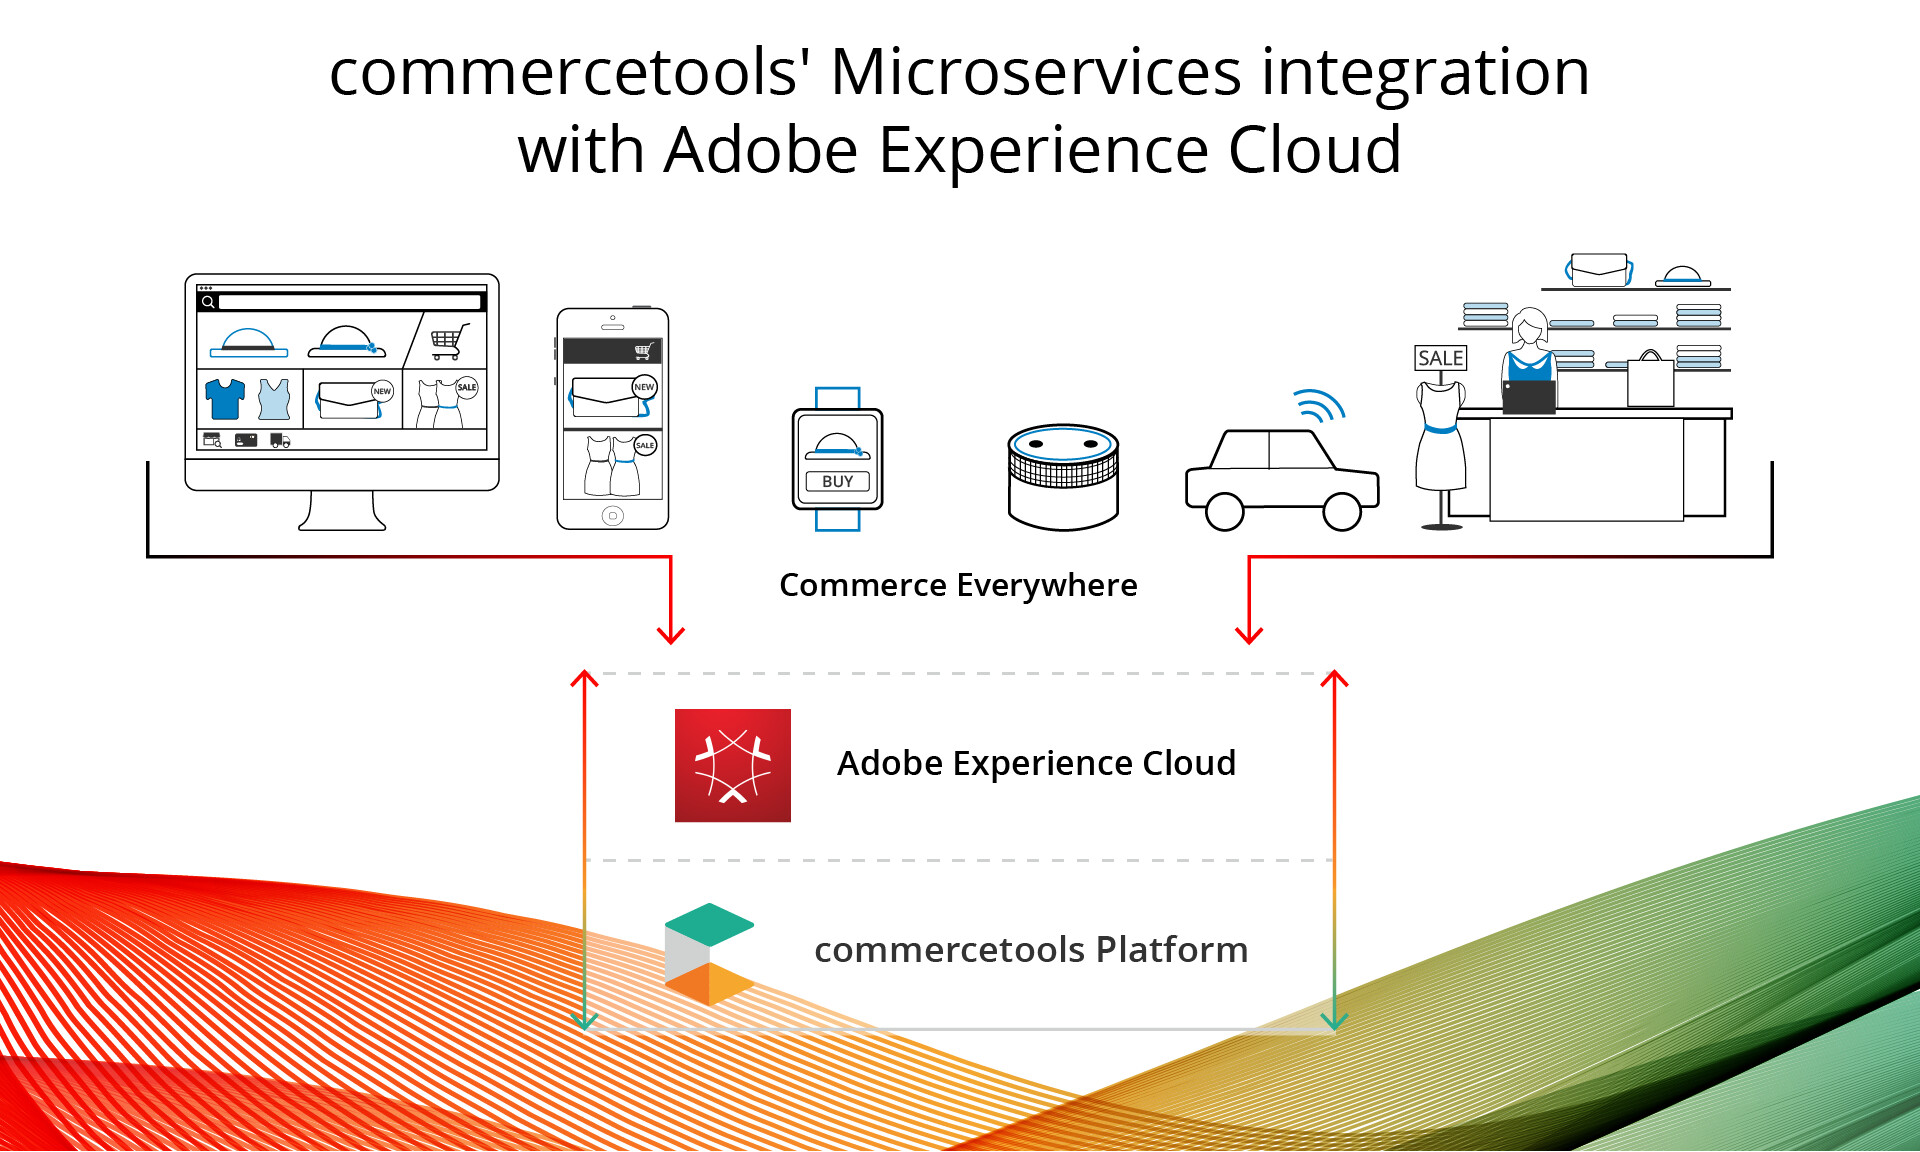 commercetools' Integration into Adobe Experience Cloud